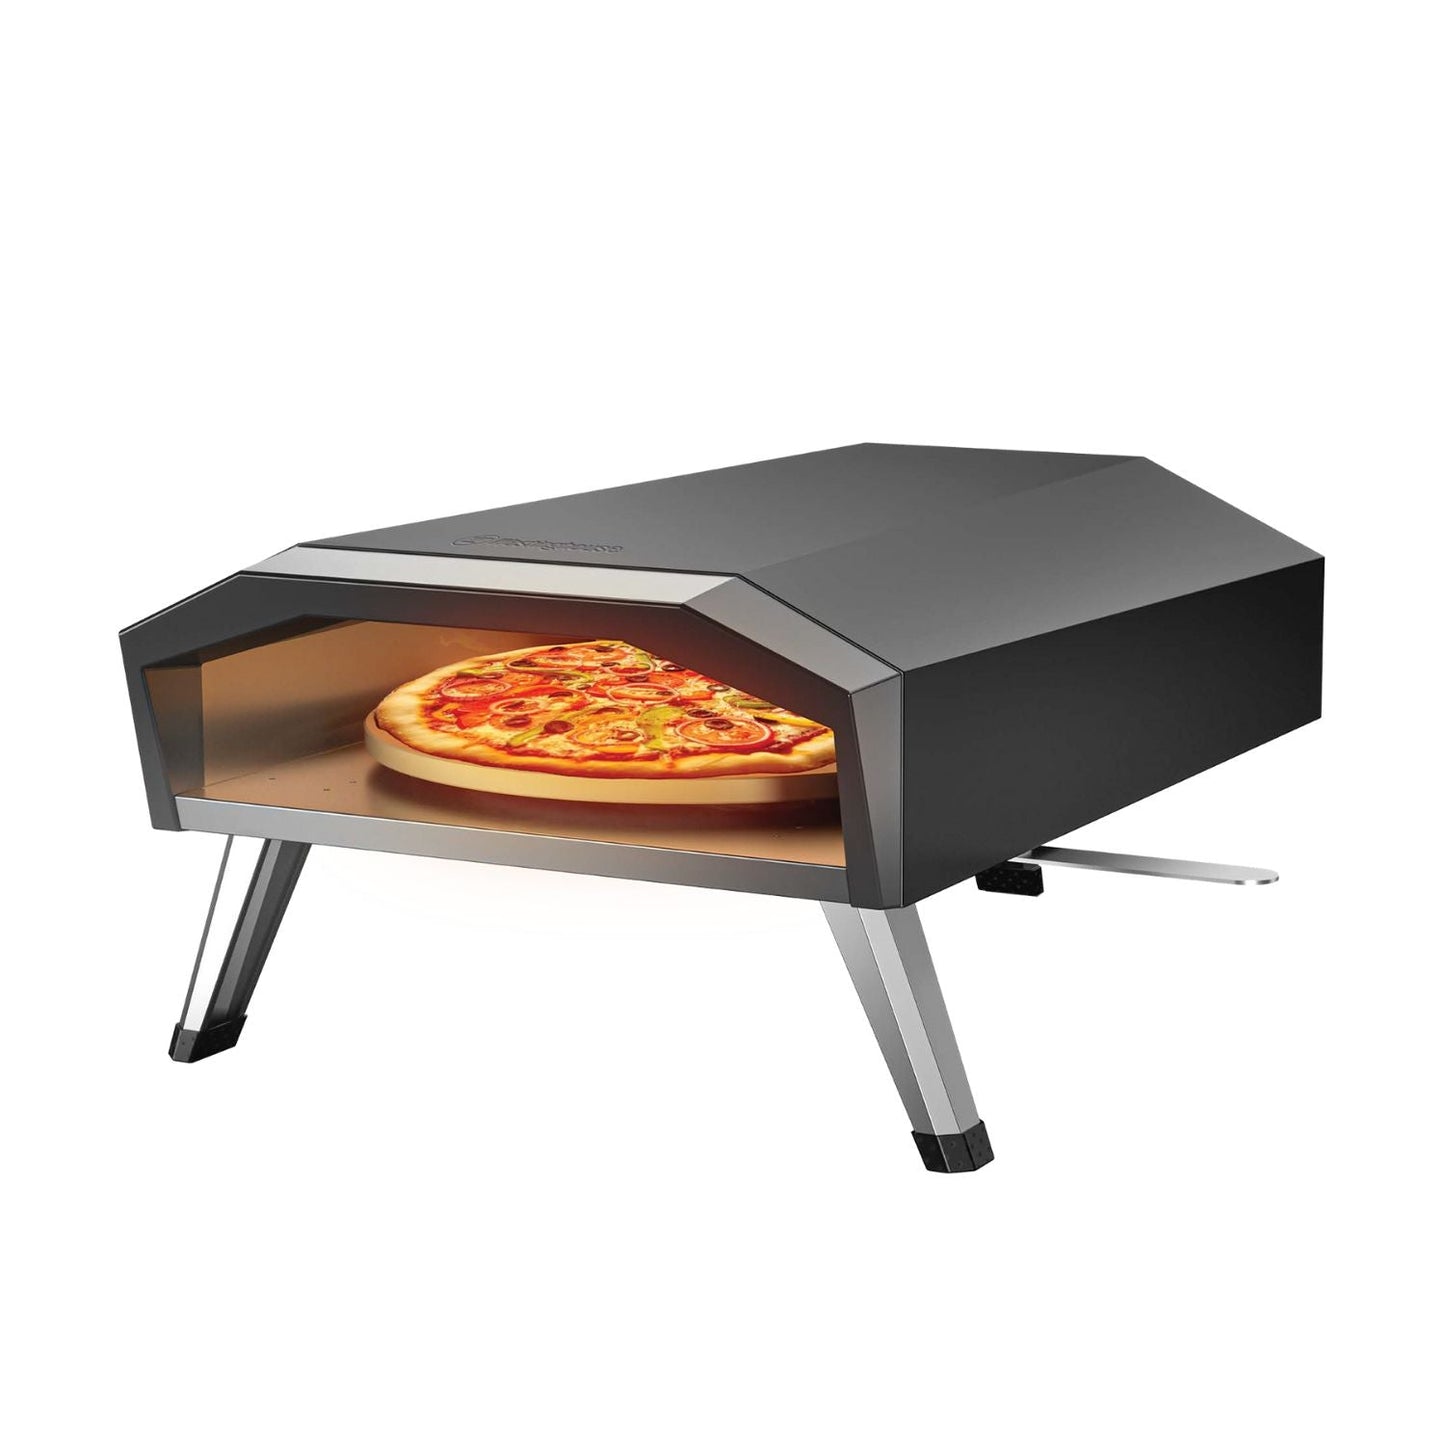 13" Gas Pizza Oven